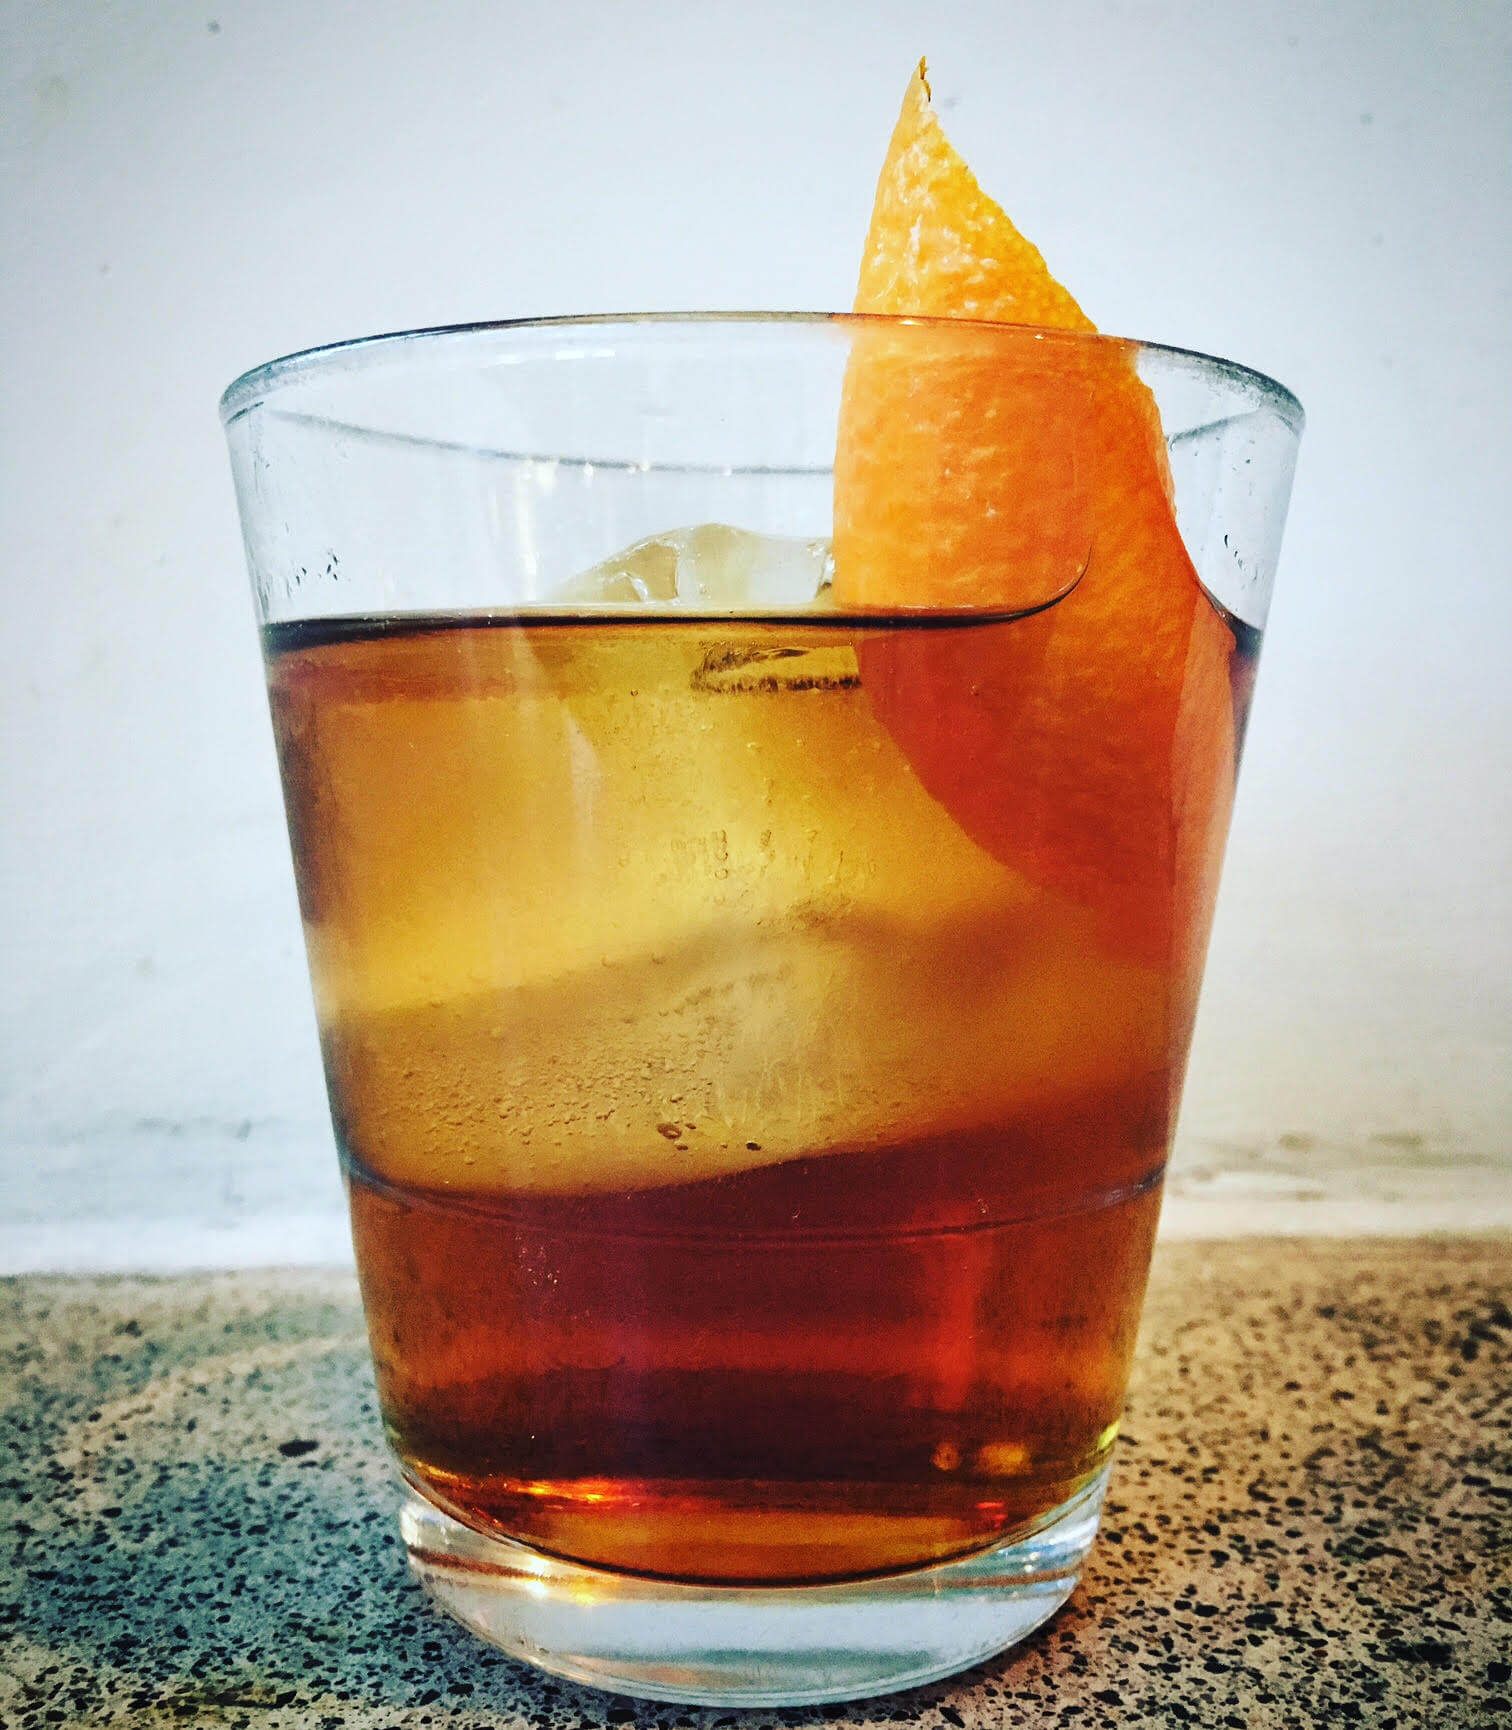 Sweet & Smoky (Just Like Me) Negroni cocktail from The Royal - 9 #negroniweek riffs